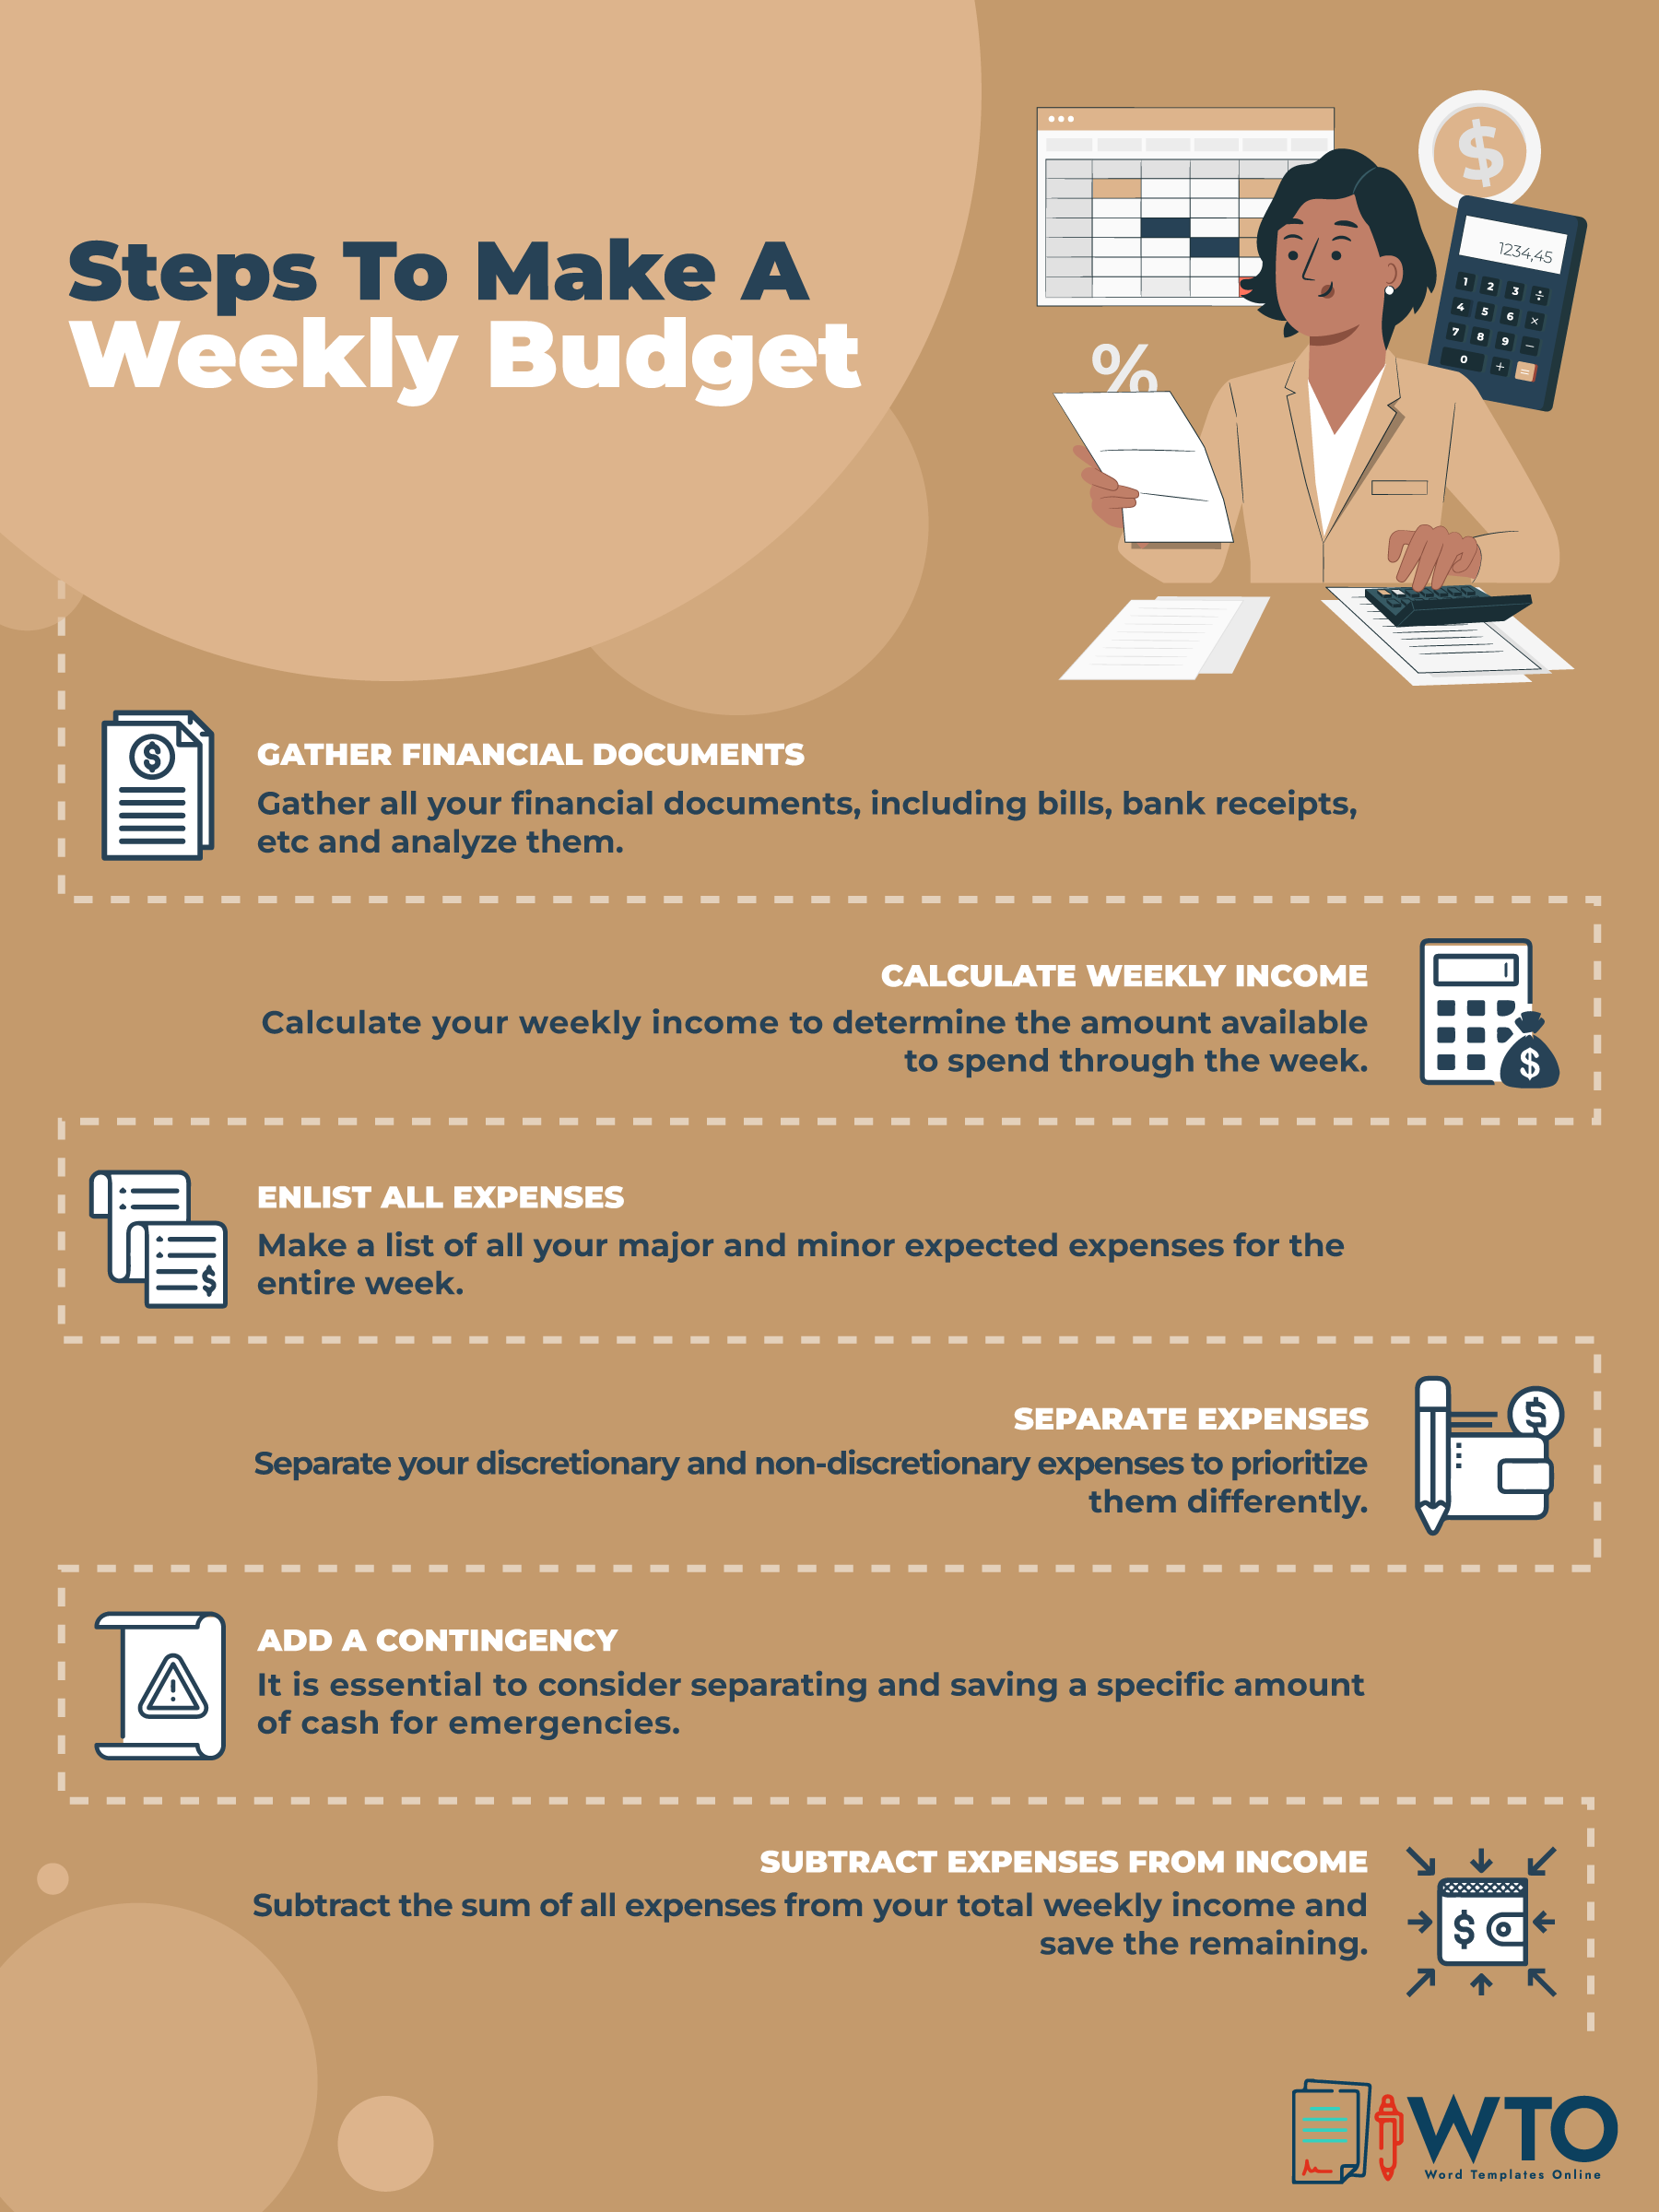 This infographic is about making weekly budget.